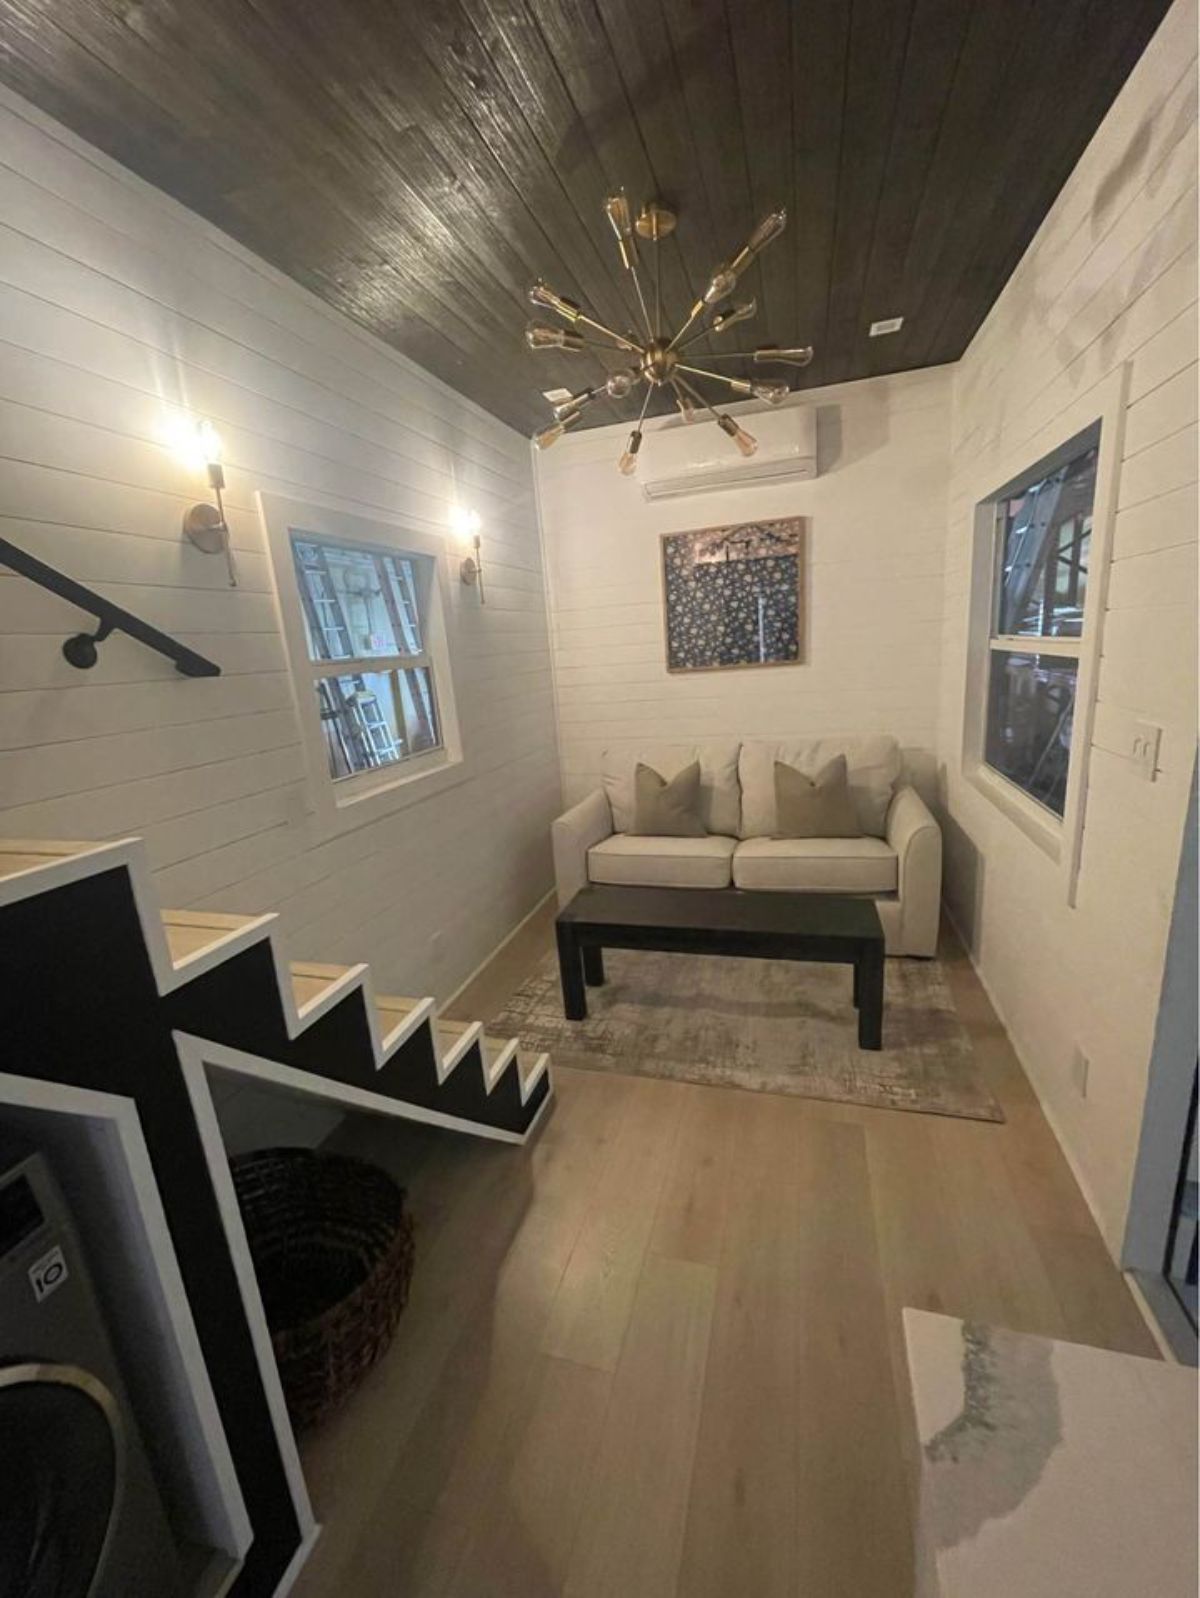 view from kitchen into tiny home living space showing windows on both sides and sofa against far wall